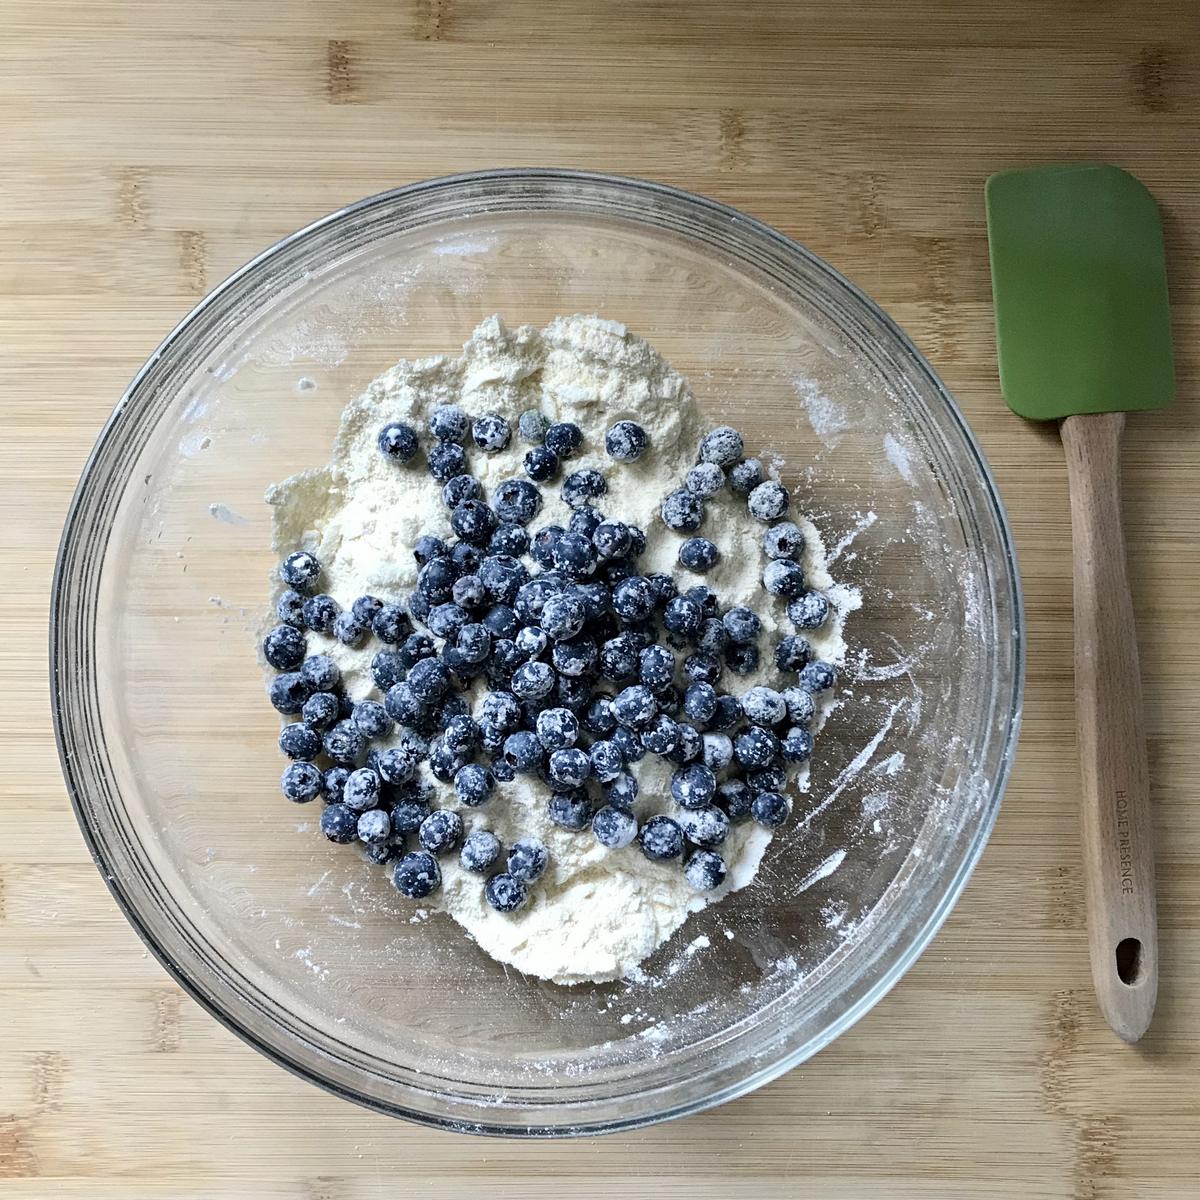 Blueberries being folded in the dry mixture.